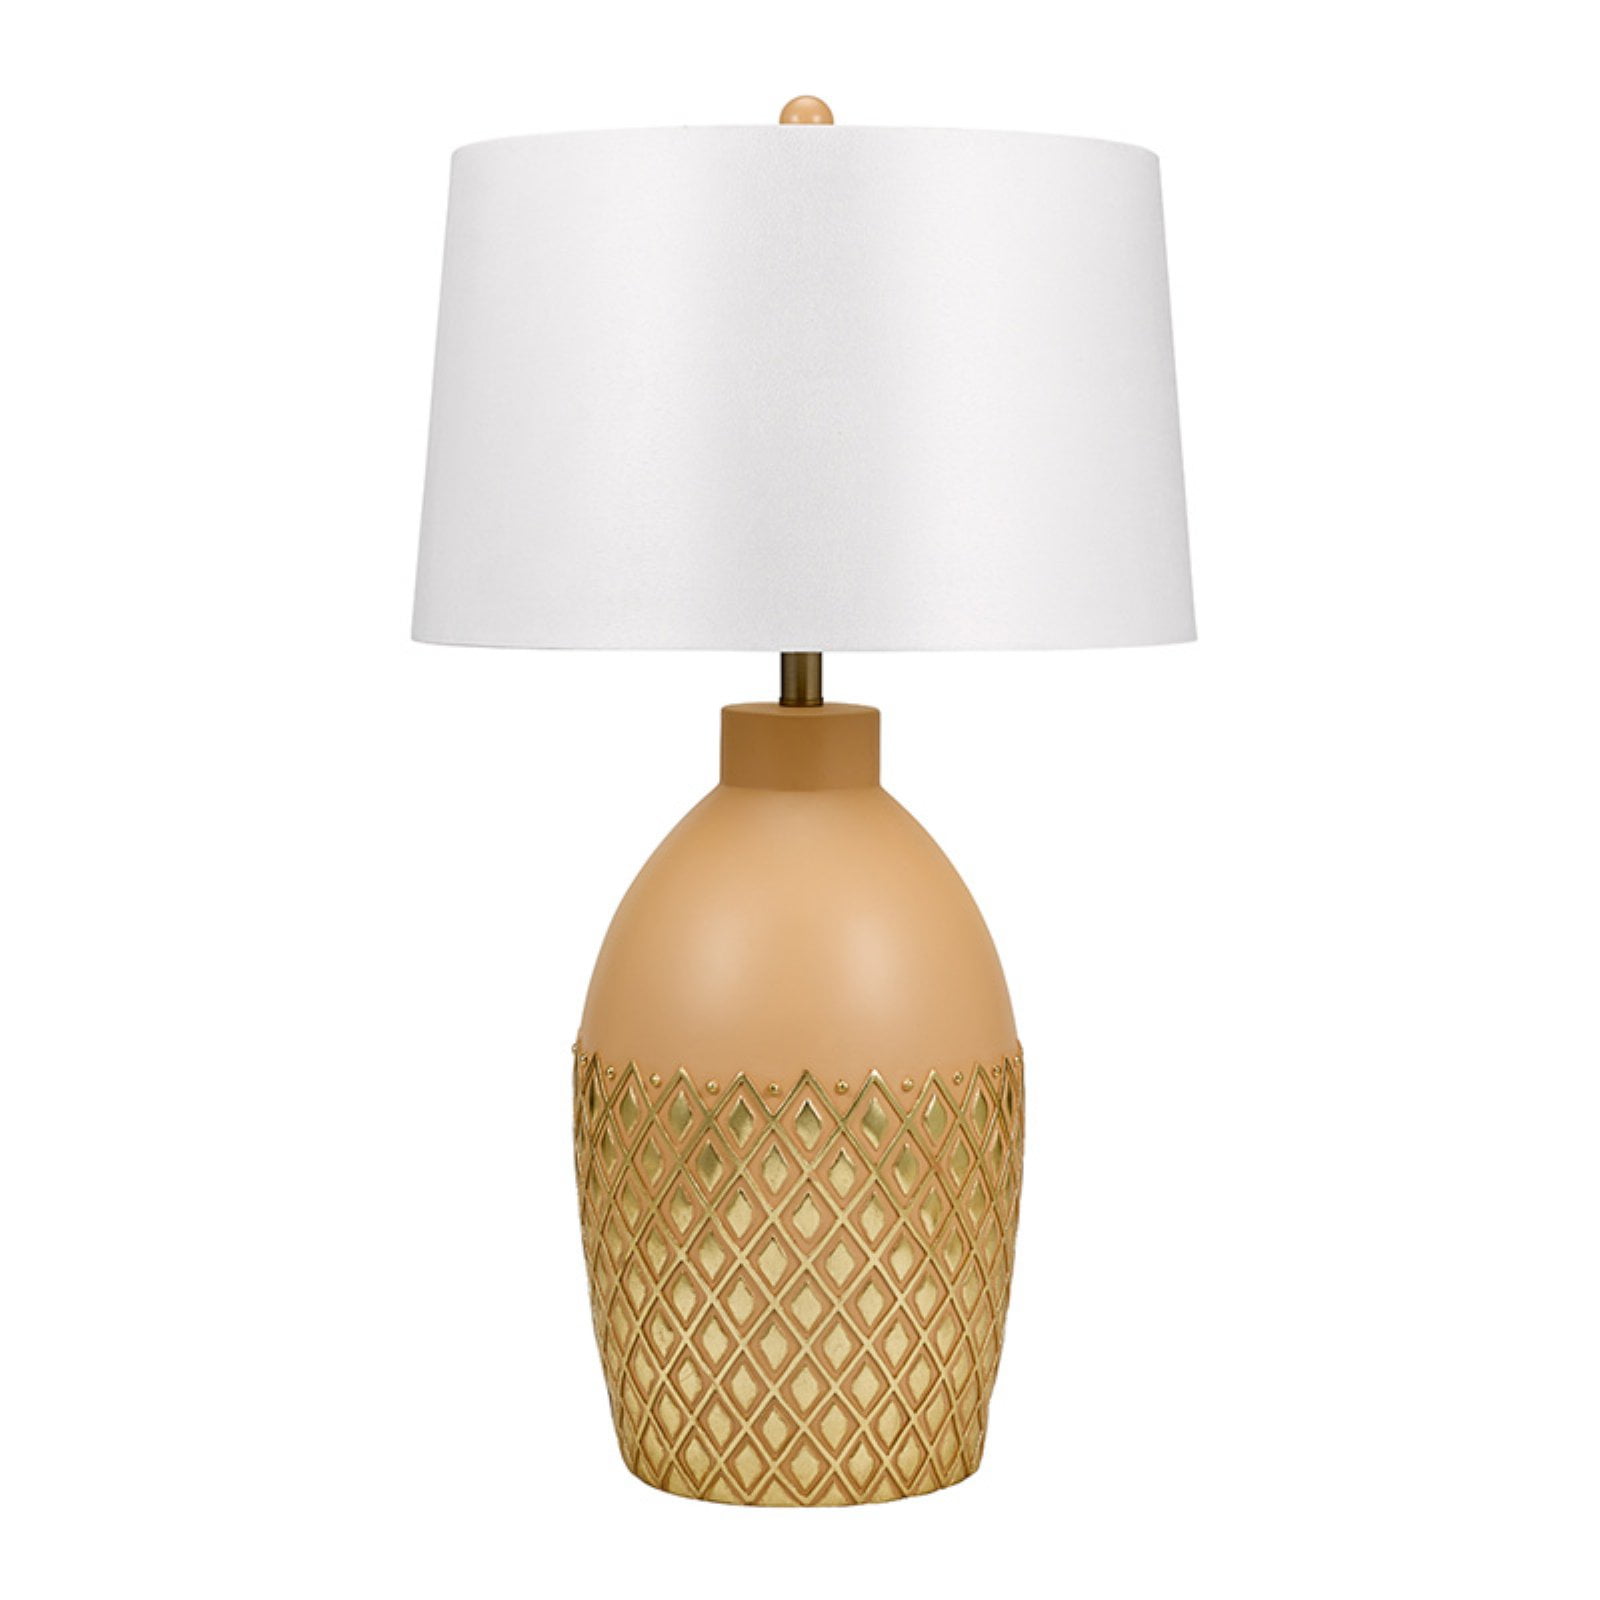 Information About Table Lamps, Ondreya Table Lamp